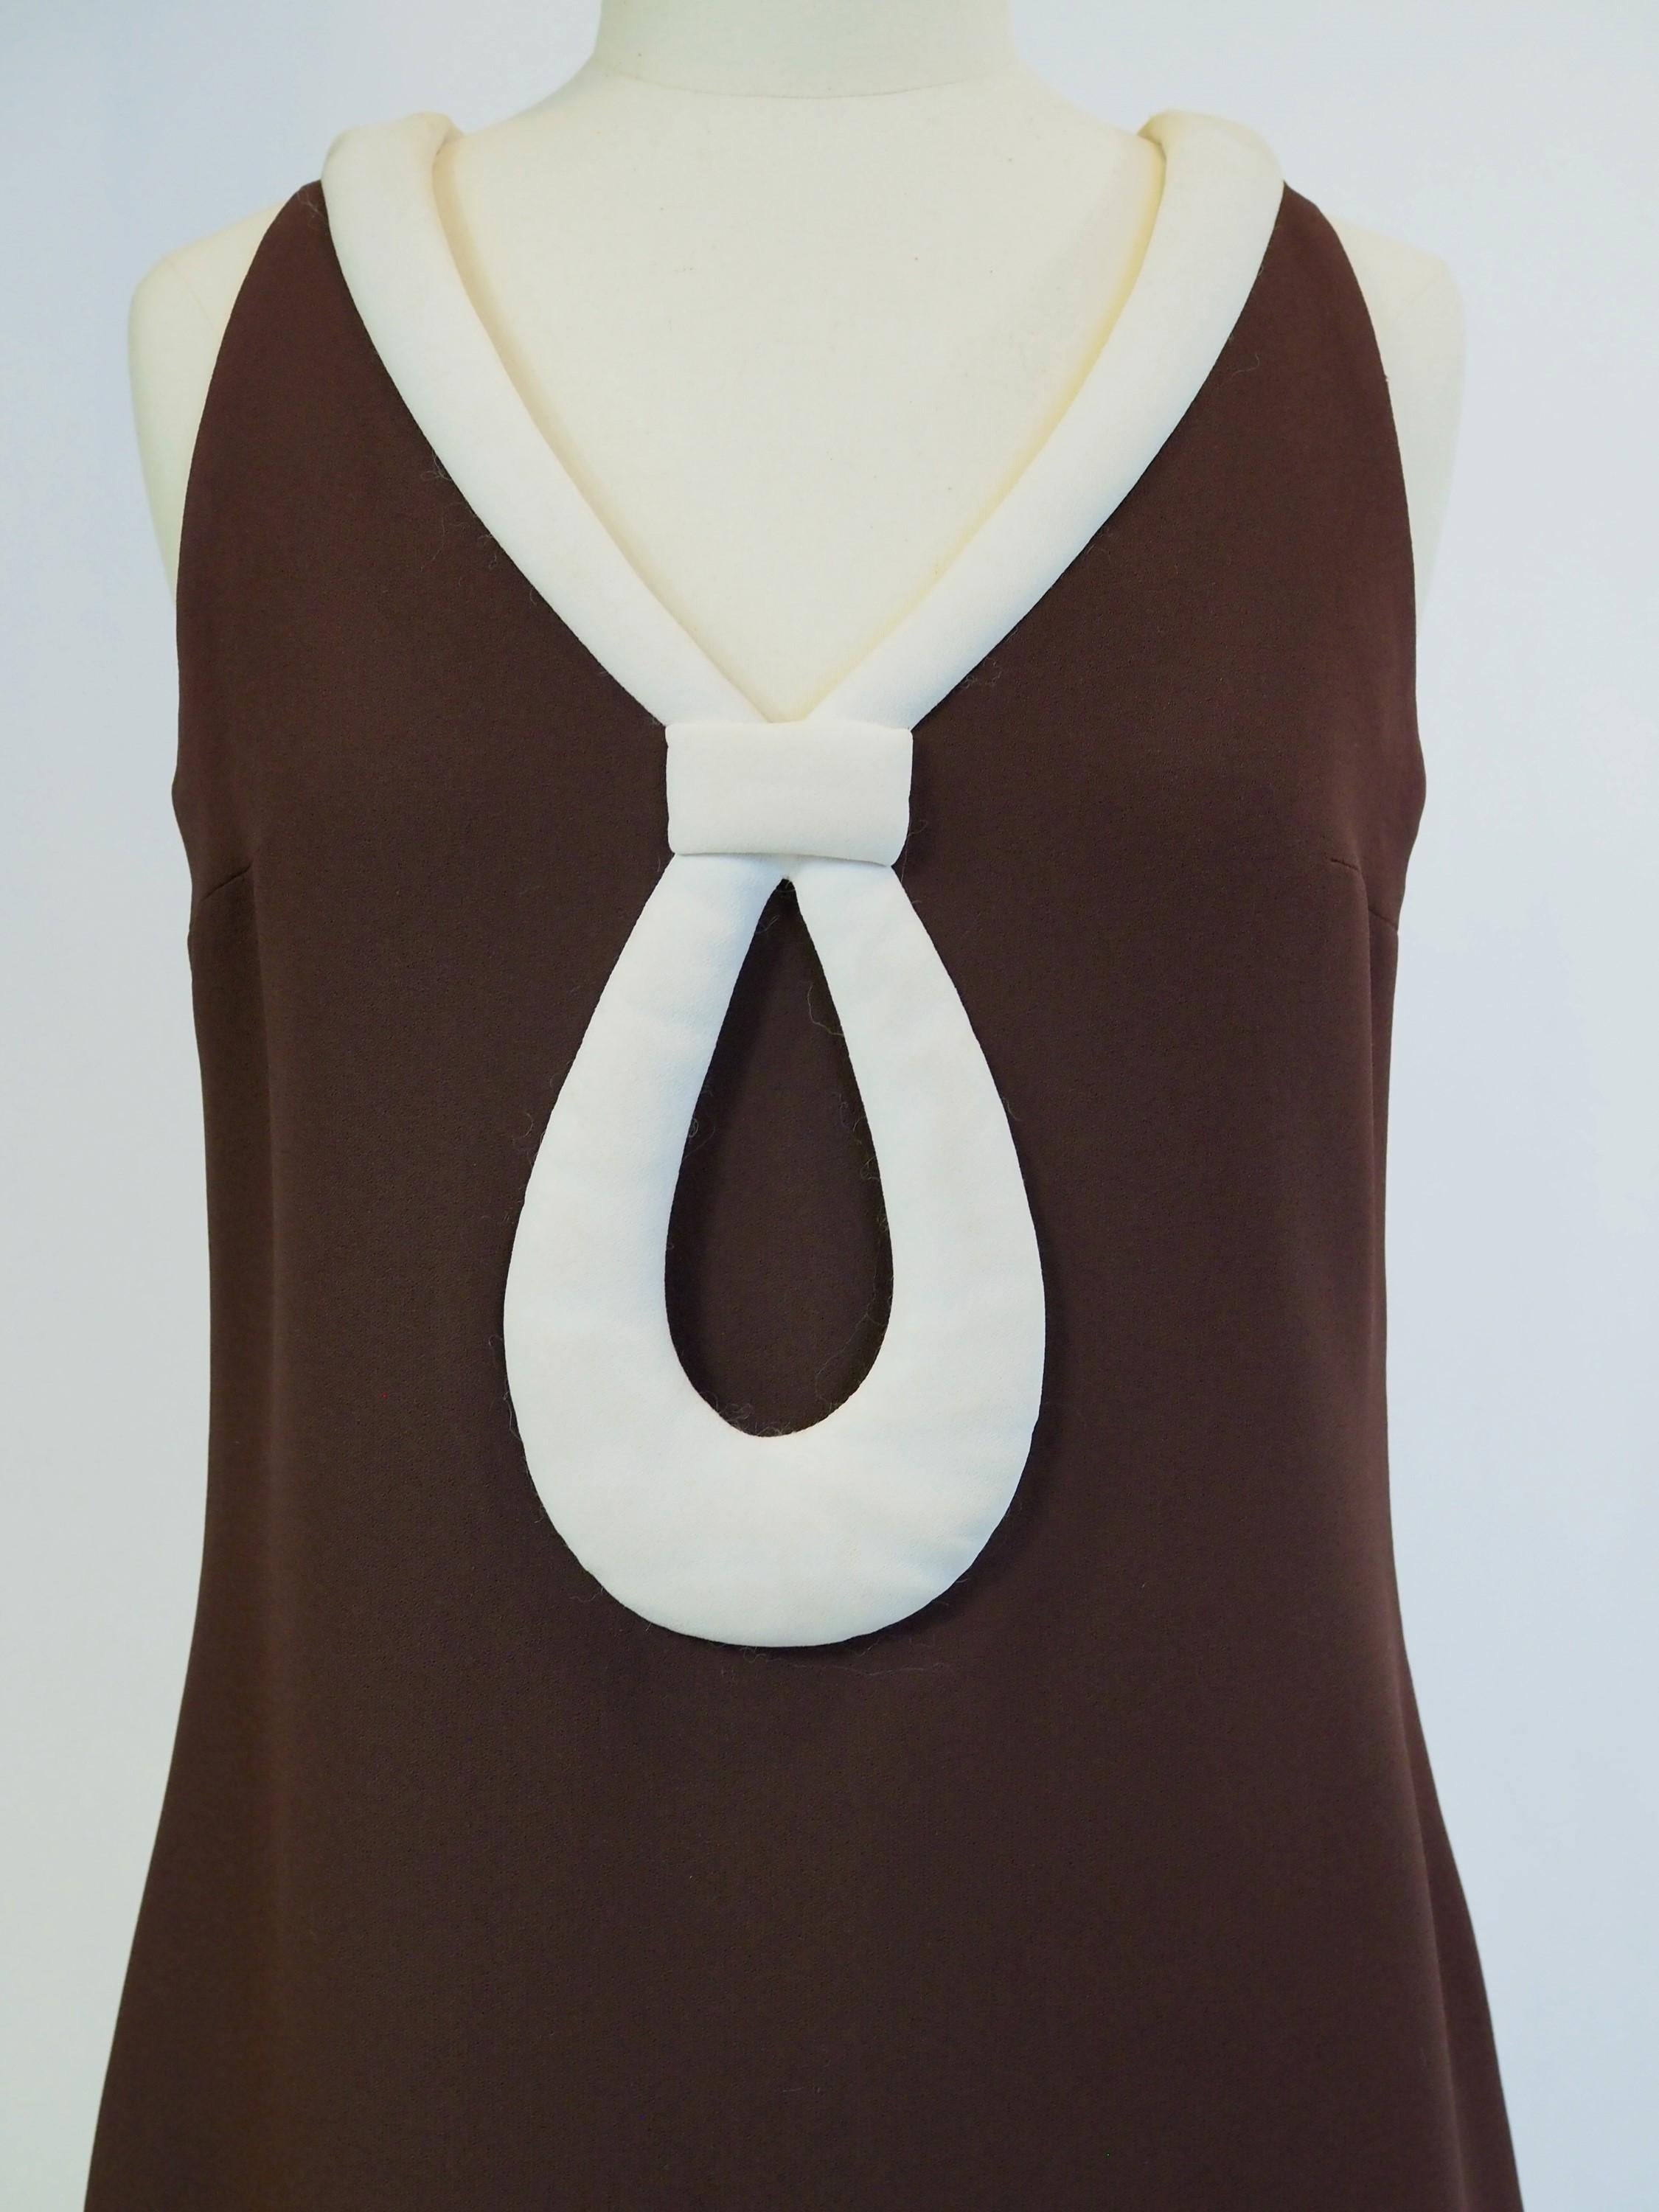 A Space Age Pierre Cardin Dress in chocolate jersey Circa 1970/1975 For Sale 2